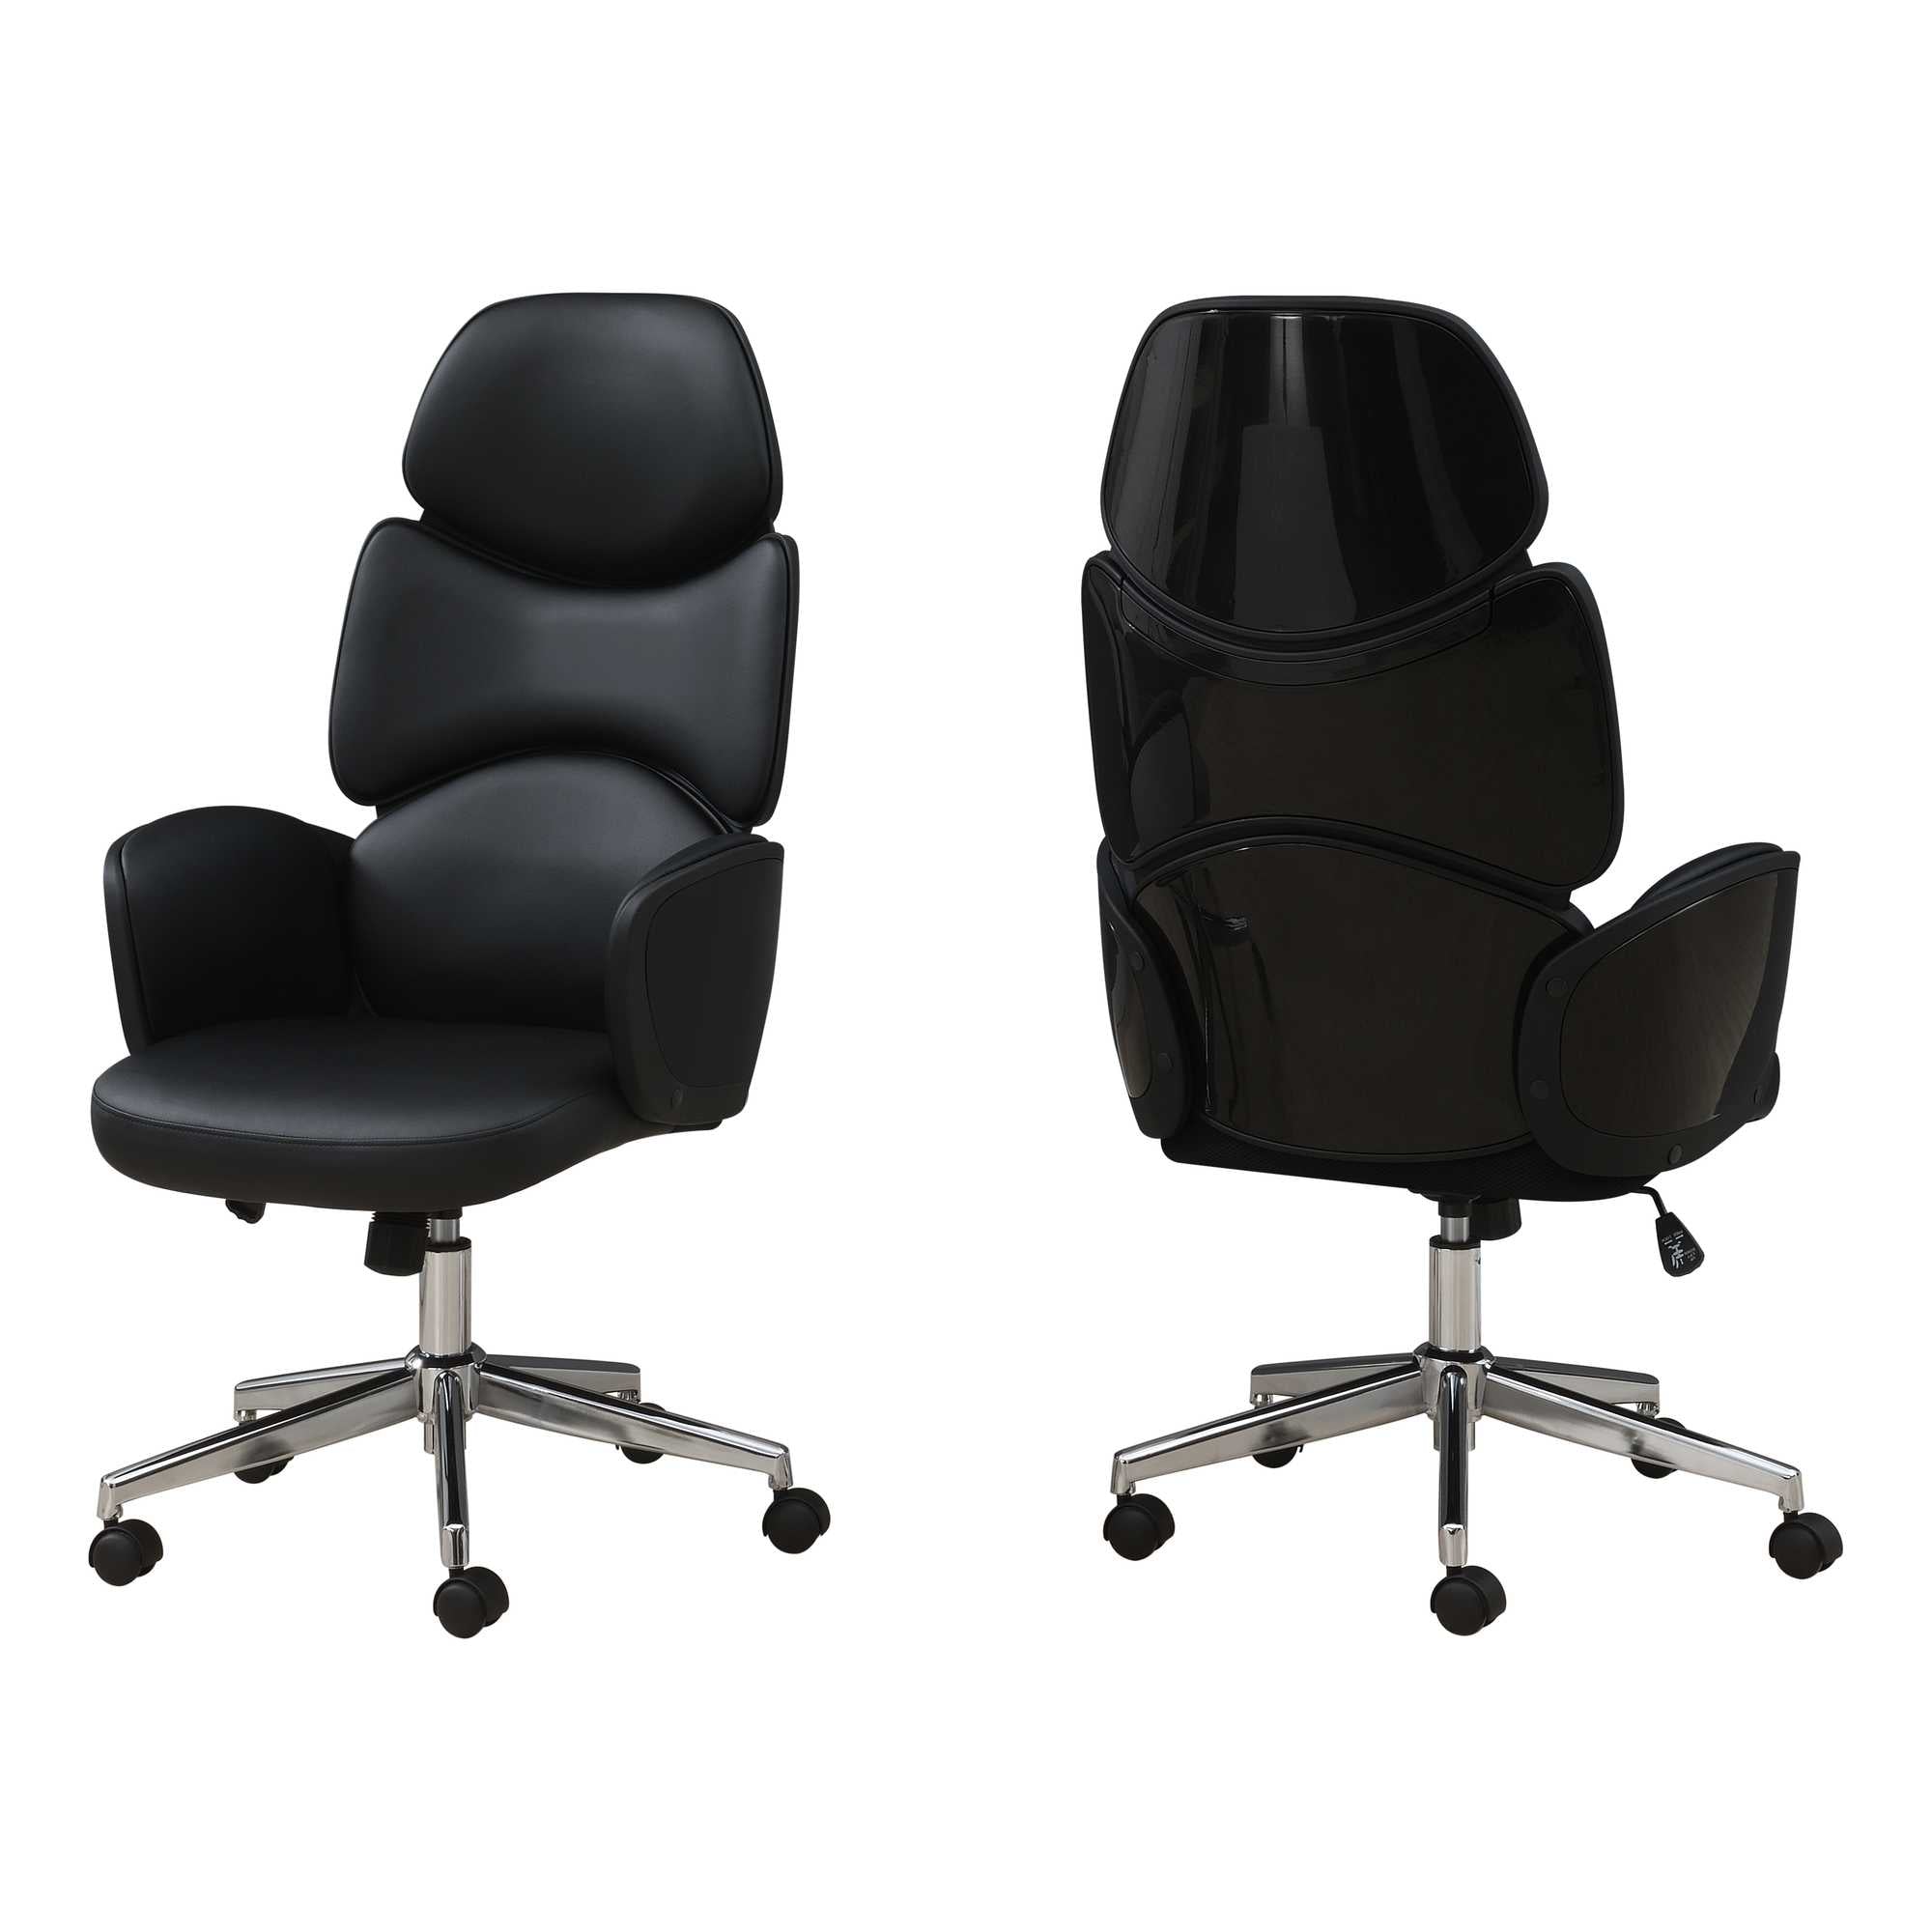 Black-Faux-Leather-Tufted-Seat-Swivel-Adjustable-Executive-Chair-Leather-Back-Plastic-Frame-Office-Chairs